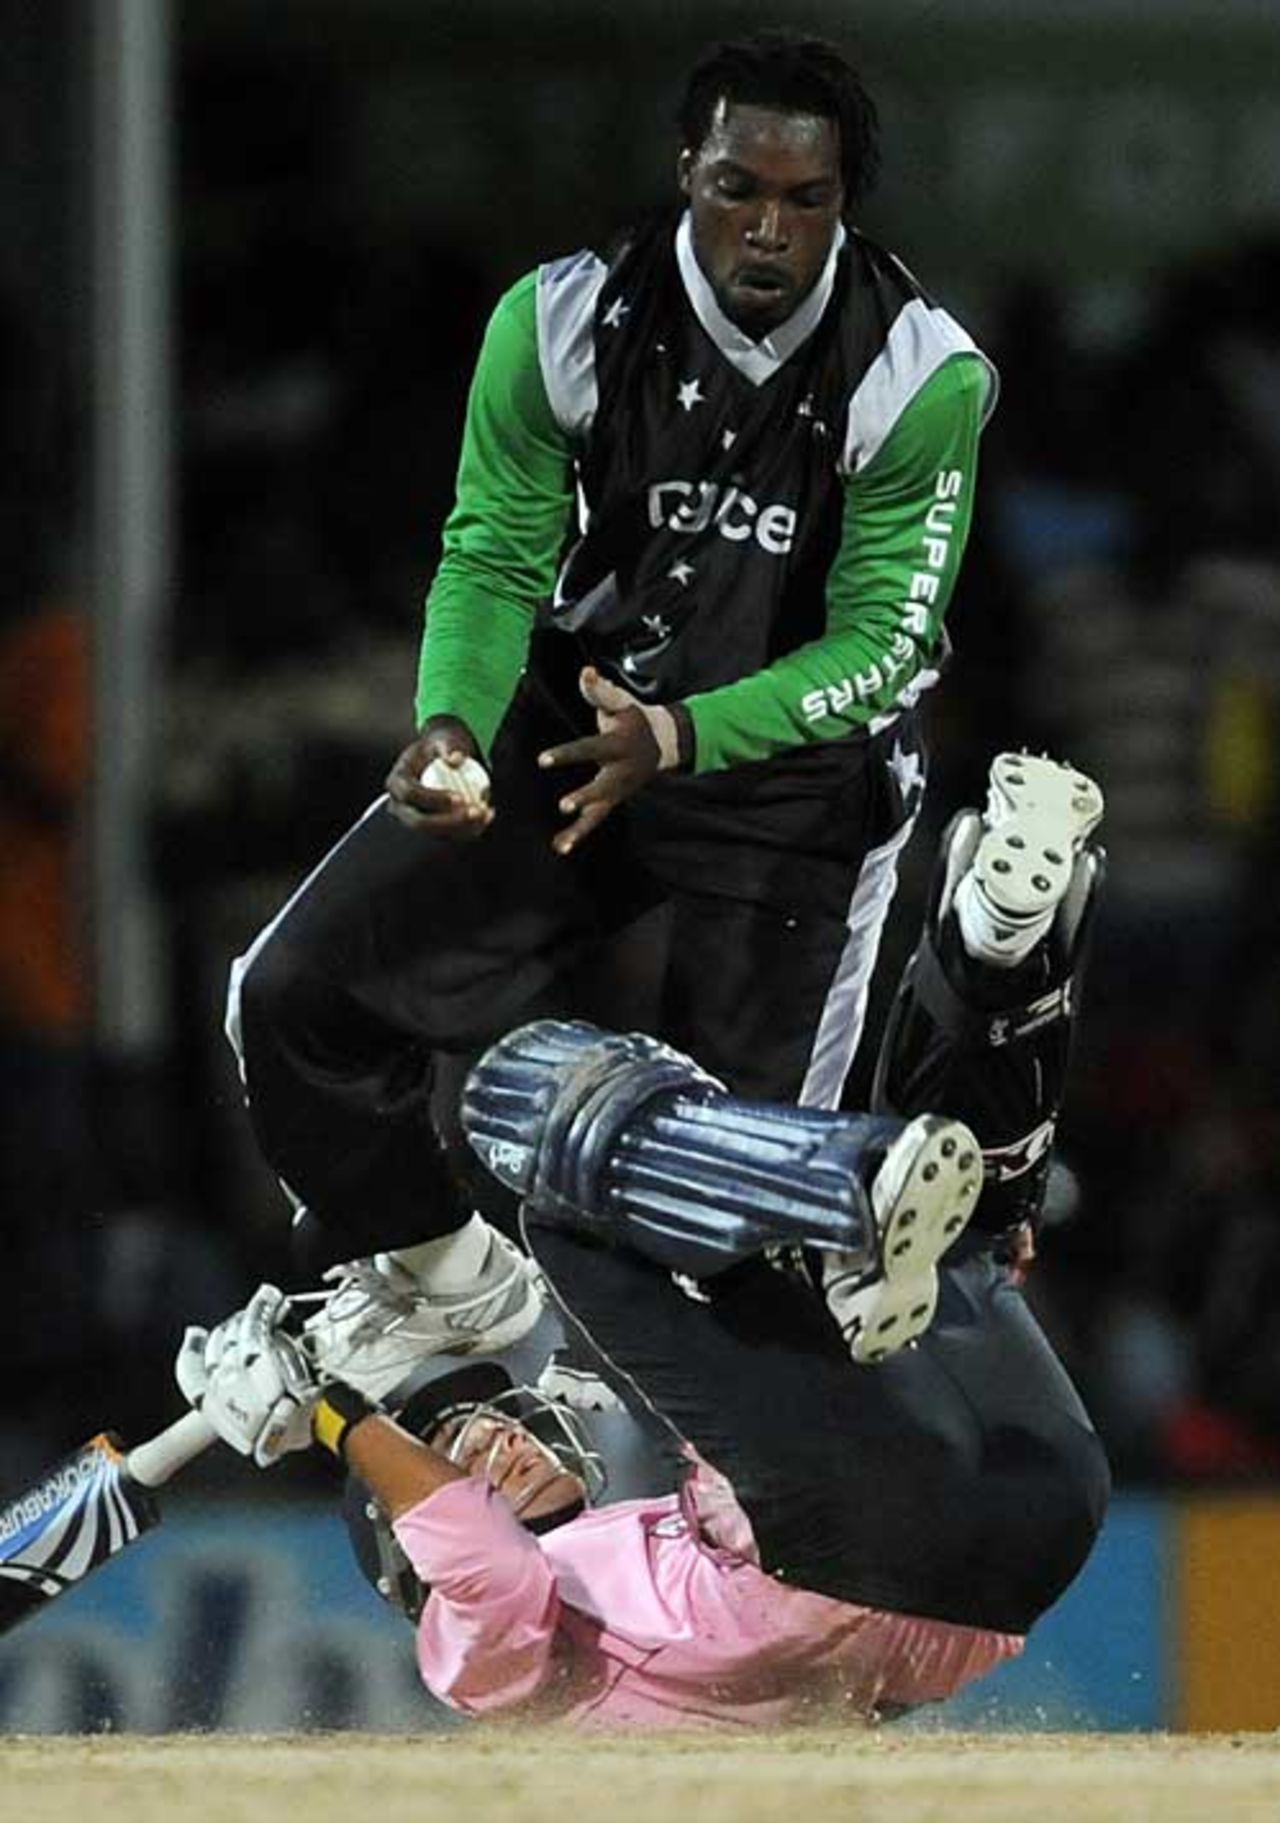 Chris Gayle gets in a bit of a tangle with Dawid Malan, Stanford Superstars v Middlesex, Antigua, October 30, 2008